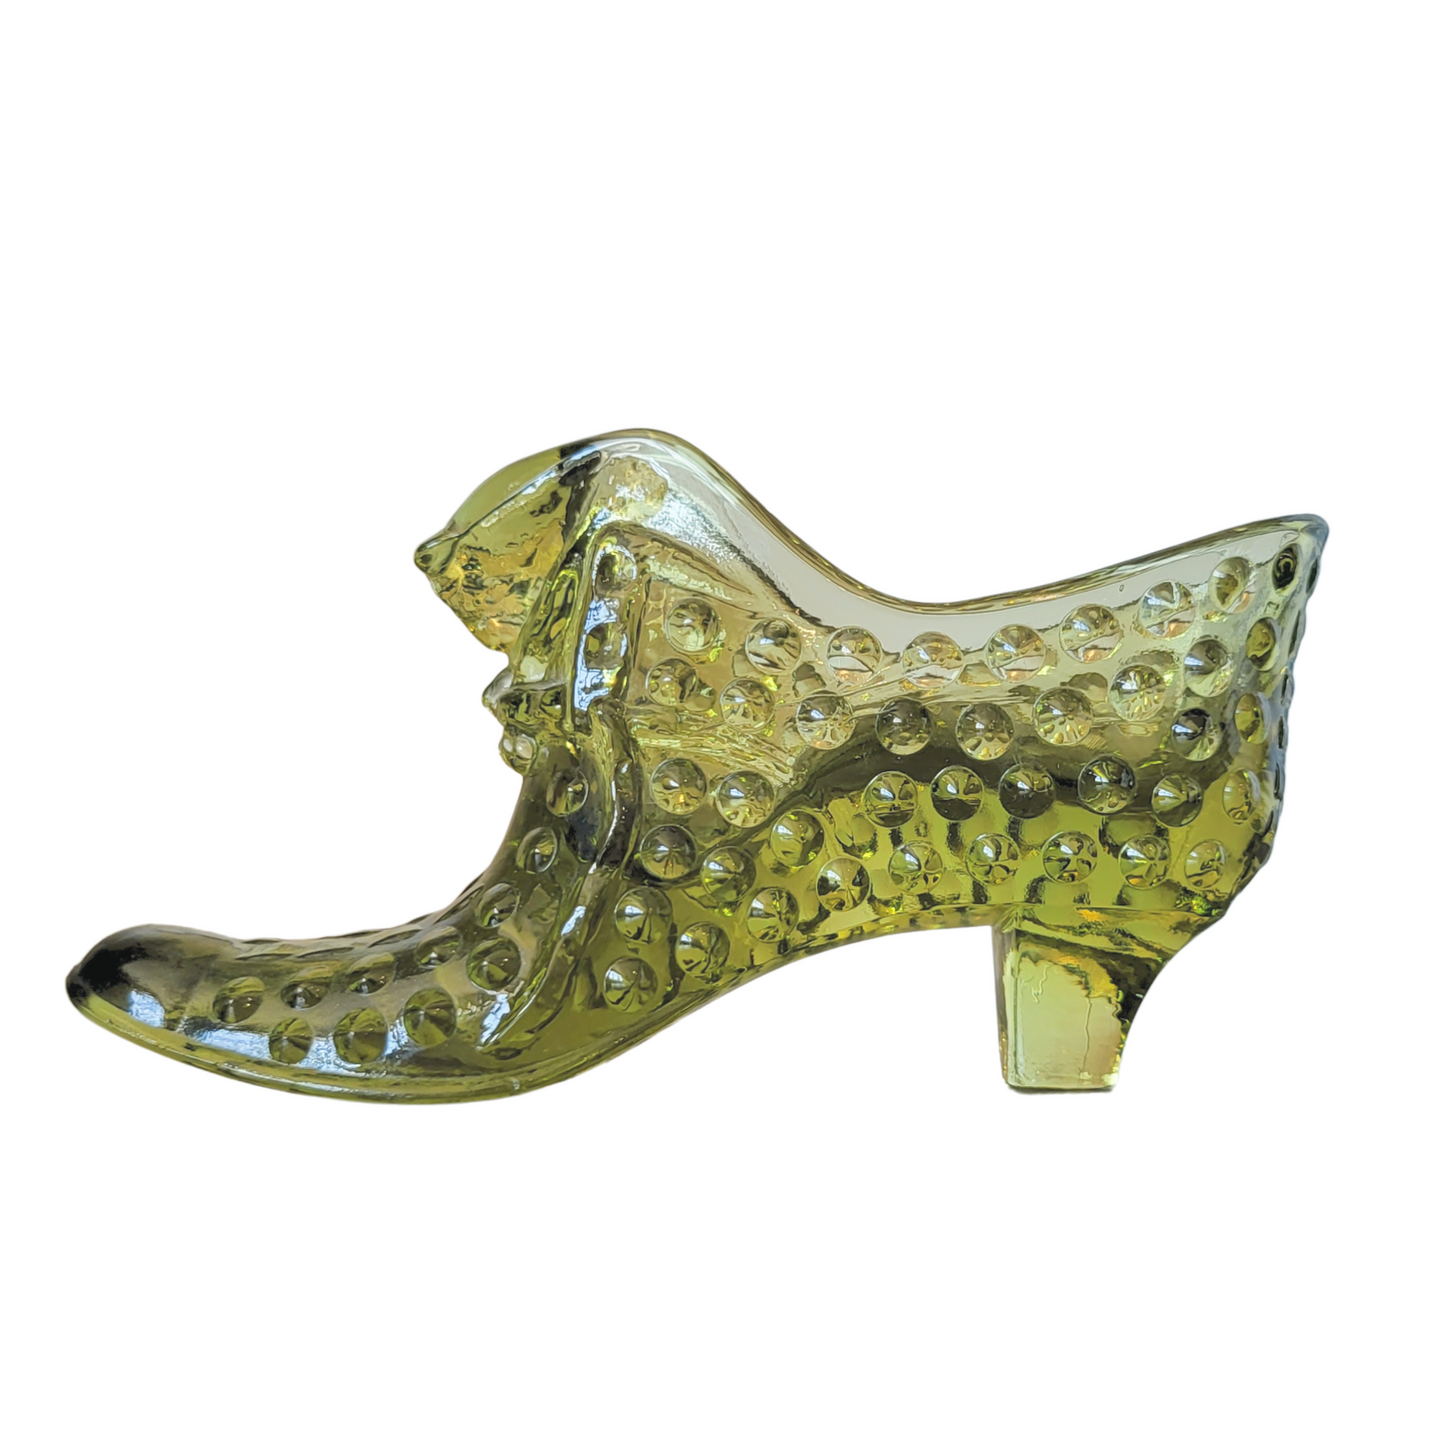 Vintage Fenton Olive Green Hobnail Glass Slipper with Cat Head Buckle